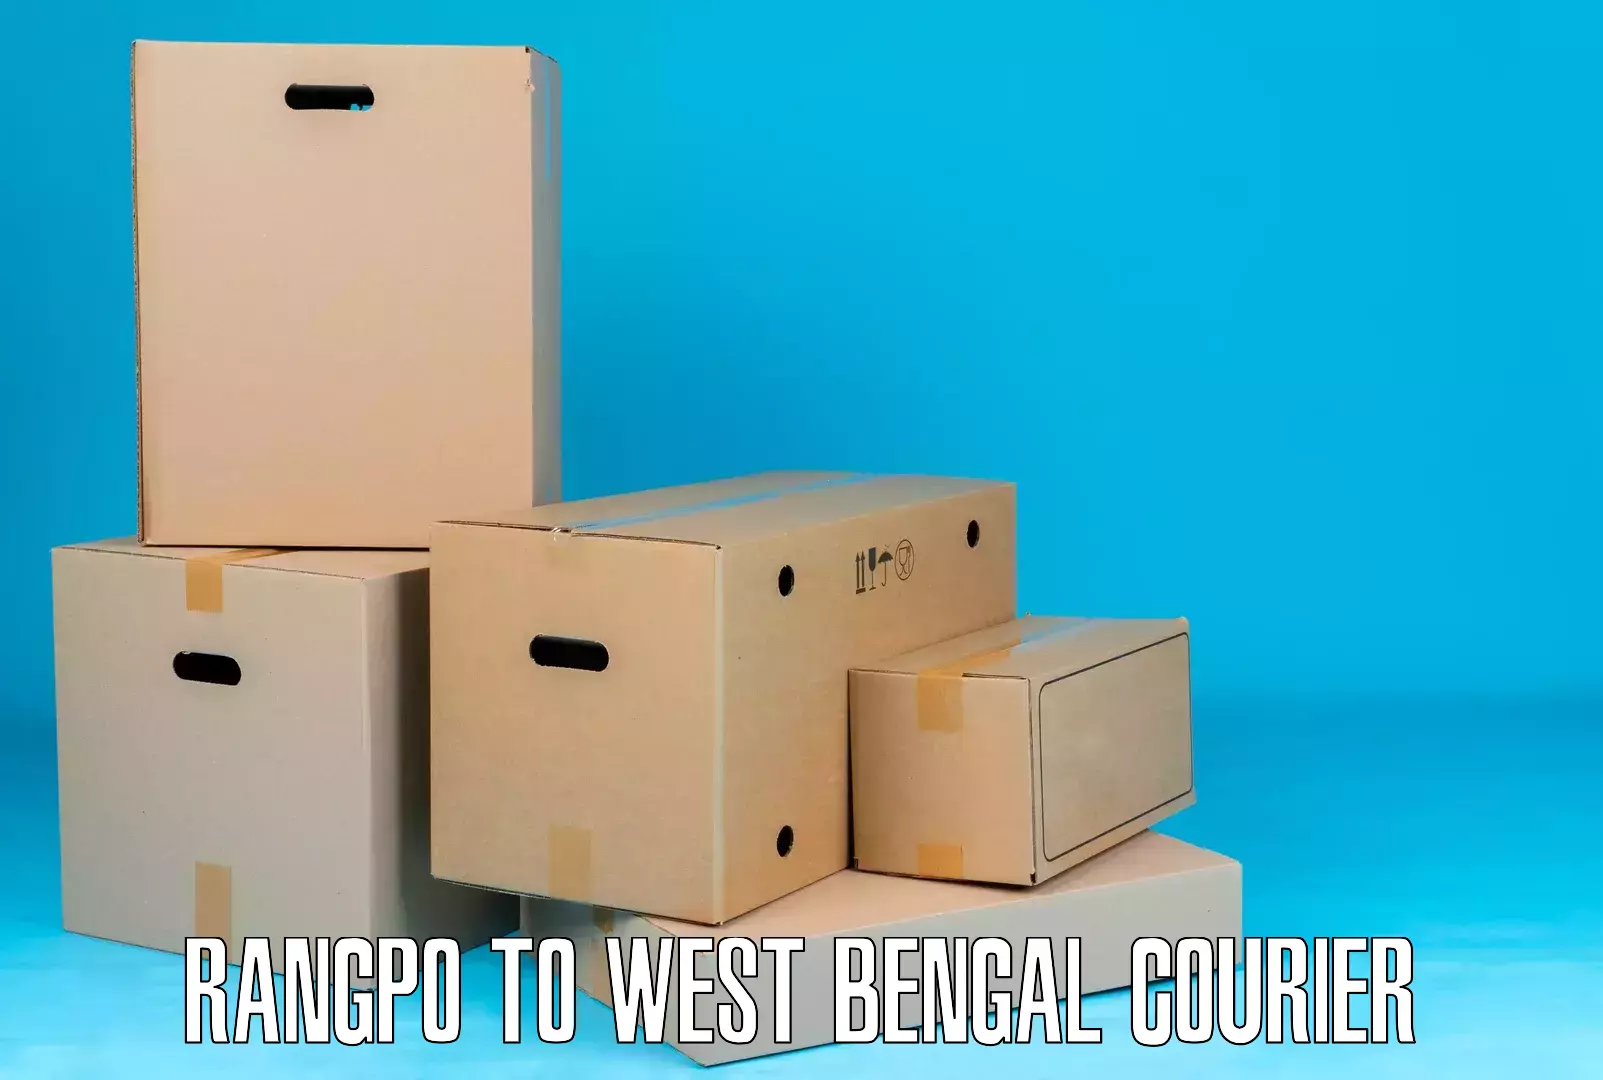 Efficient package consolidation Rangpo to West Bengal